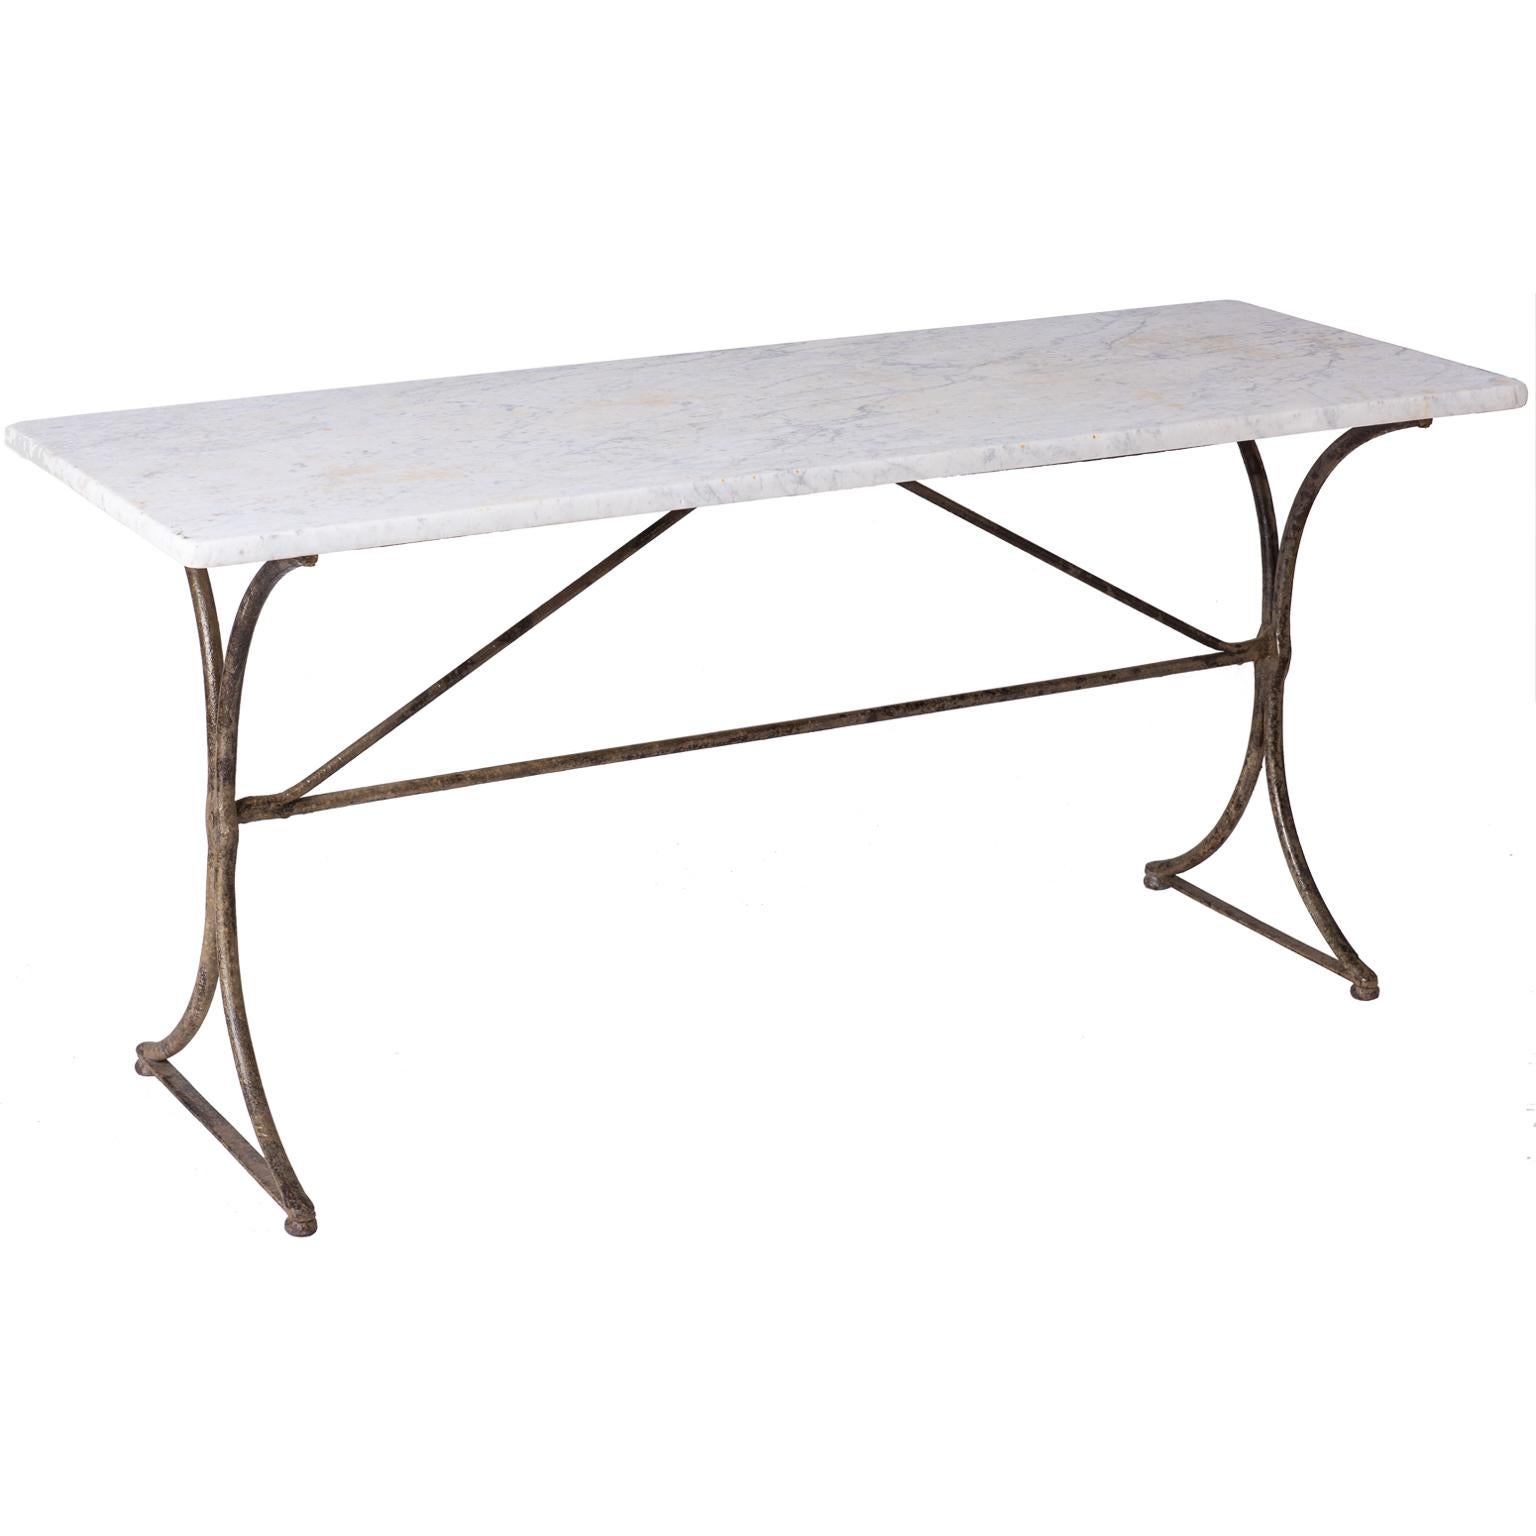 19th Century French Marble Top Table with Handwrought Iron Base